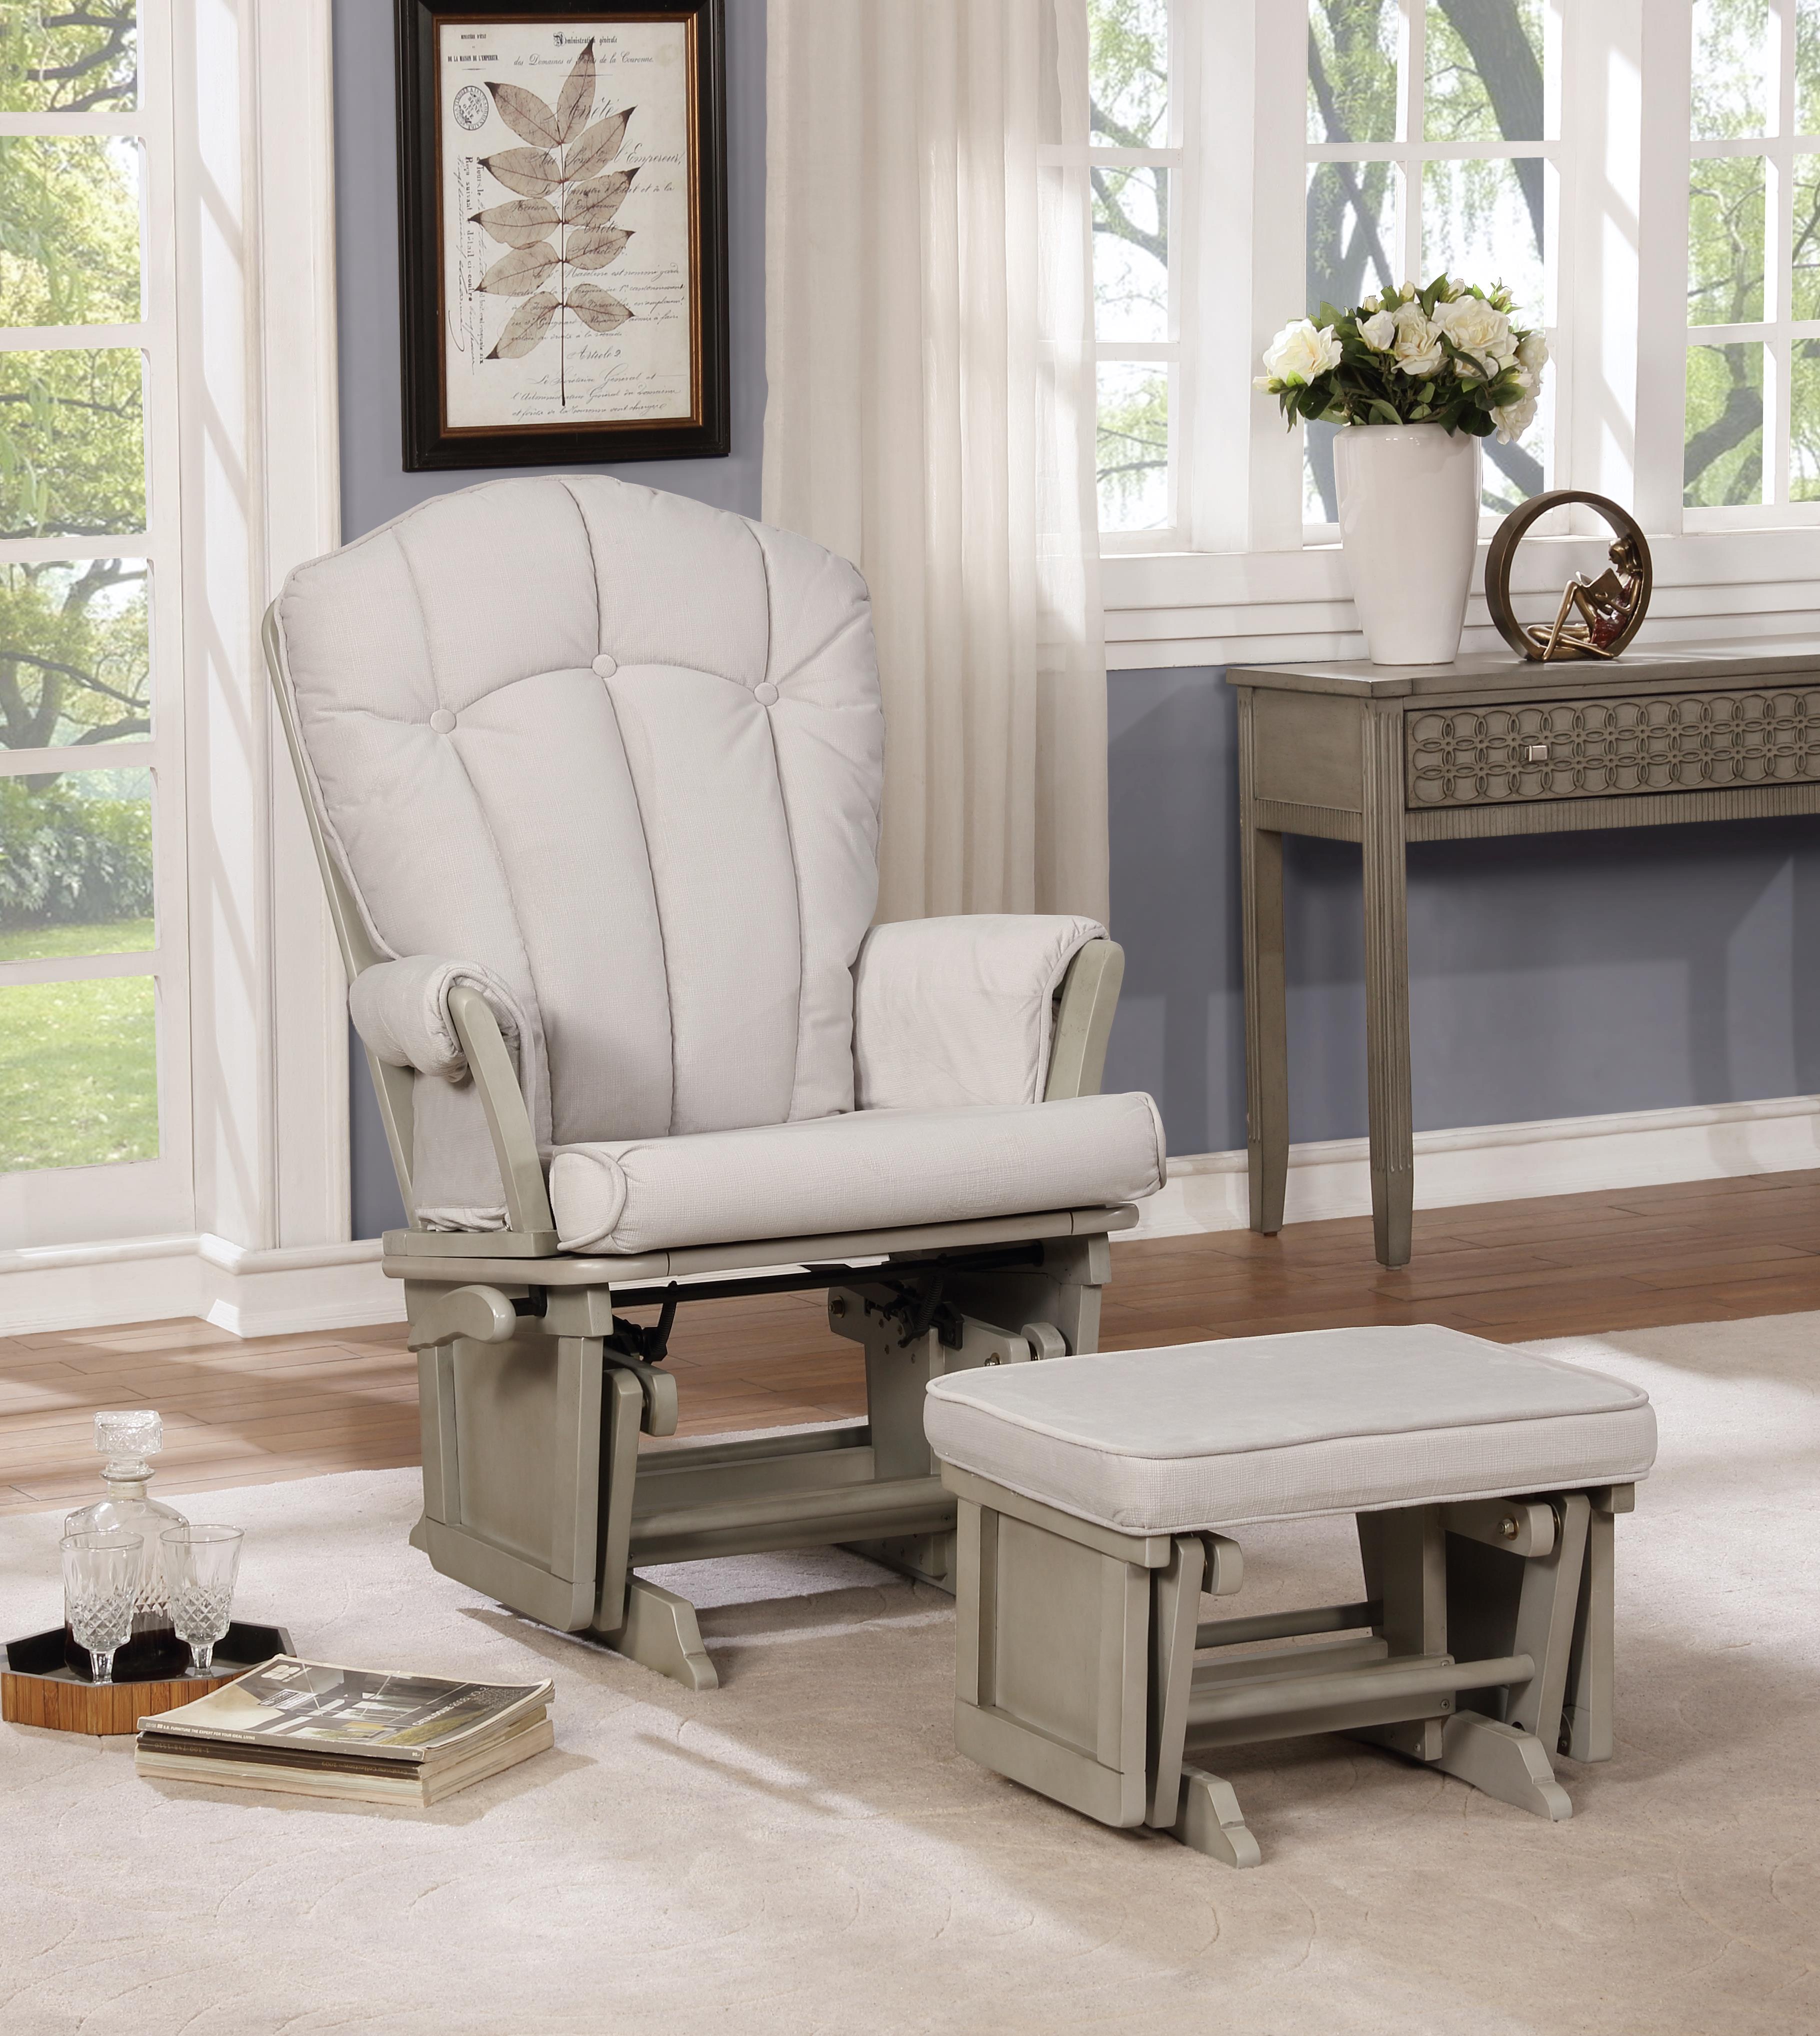 Giselle Glider Ottoman Set Ready for Pick Up - In Stock Giselle Glider Set